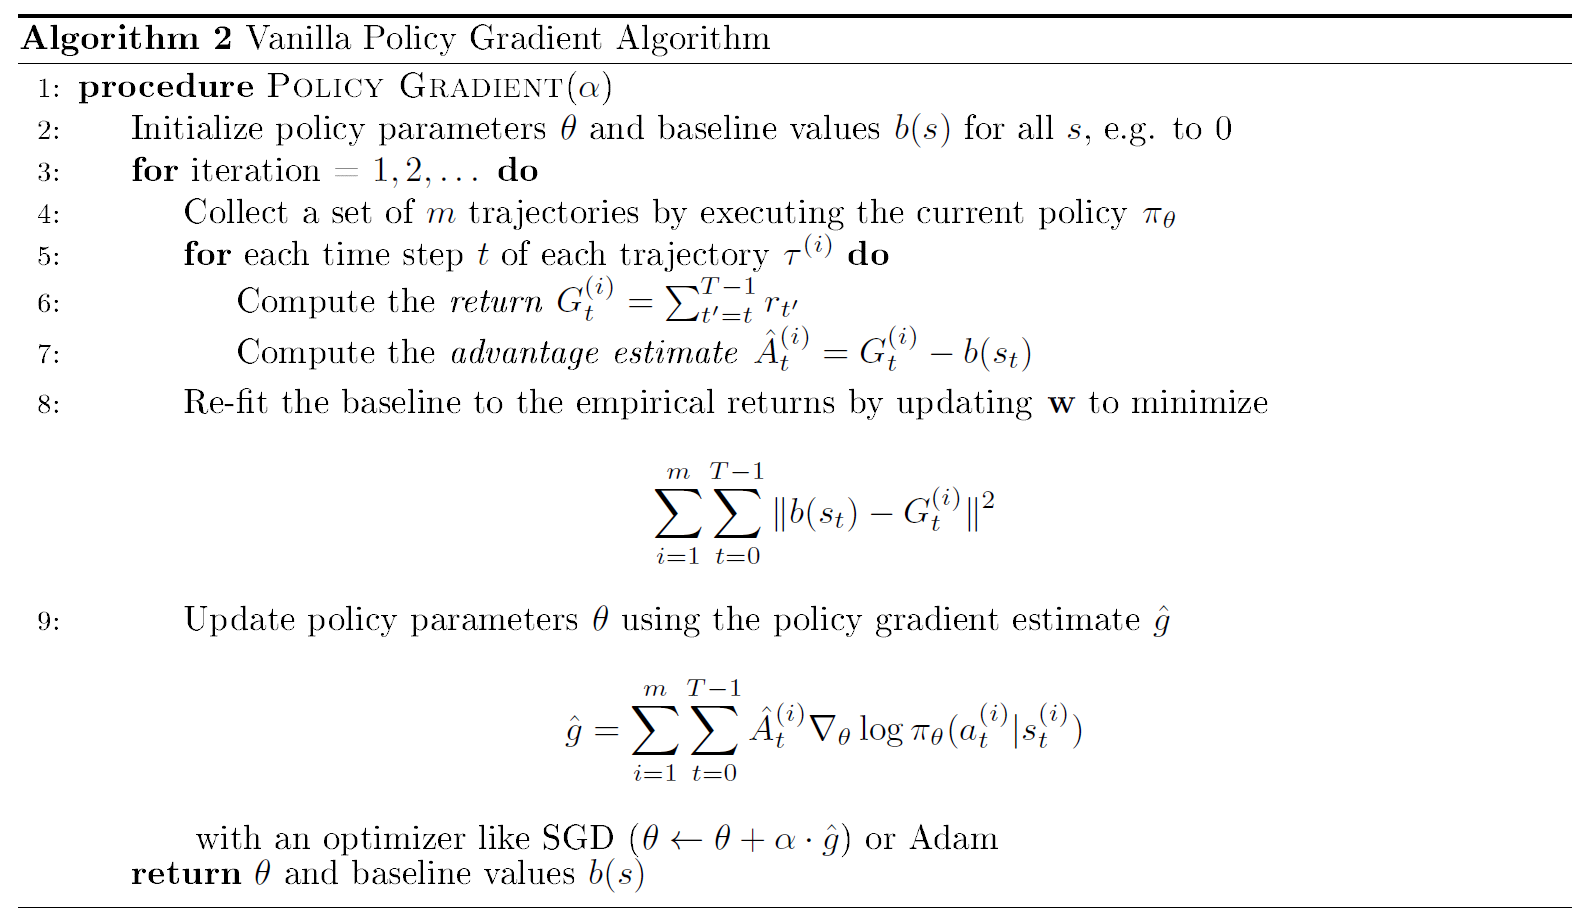 docs/stanford-cs234-notes-zh/img/fig8&9_alg_2.png